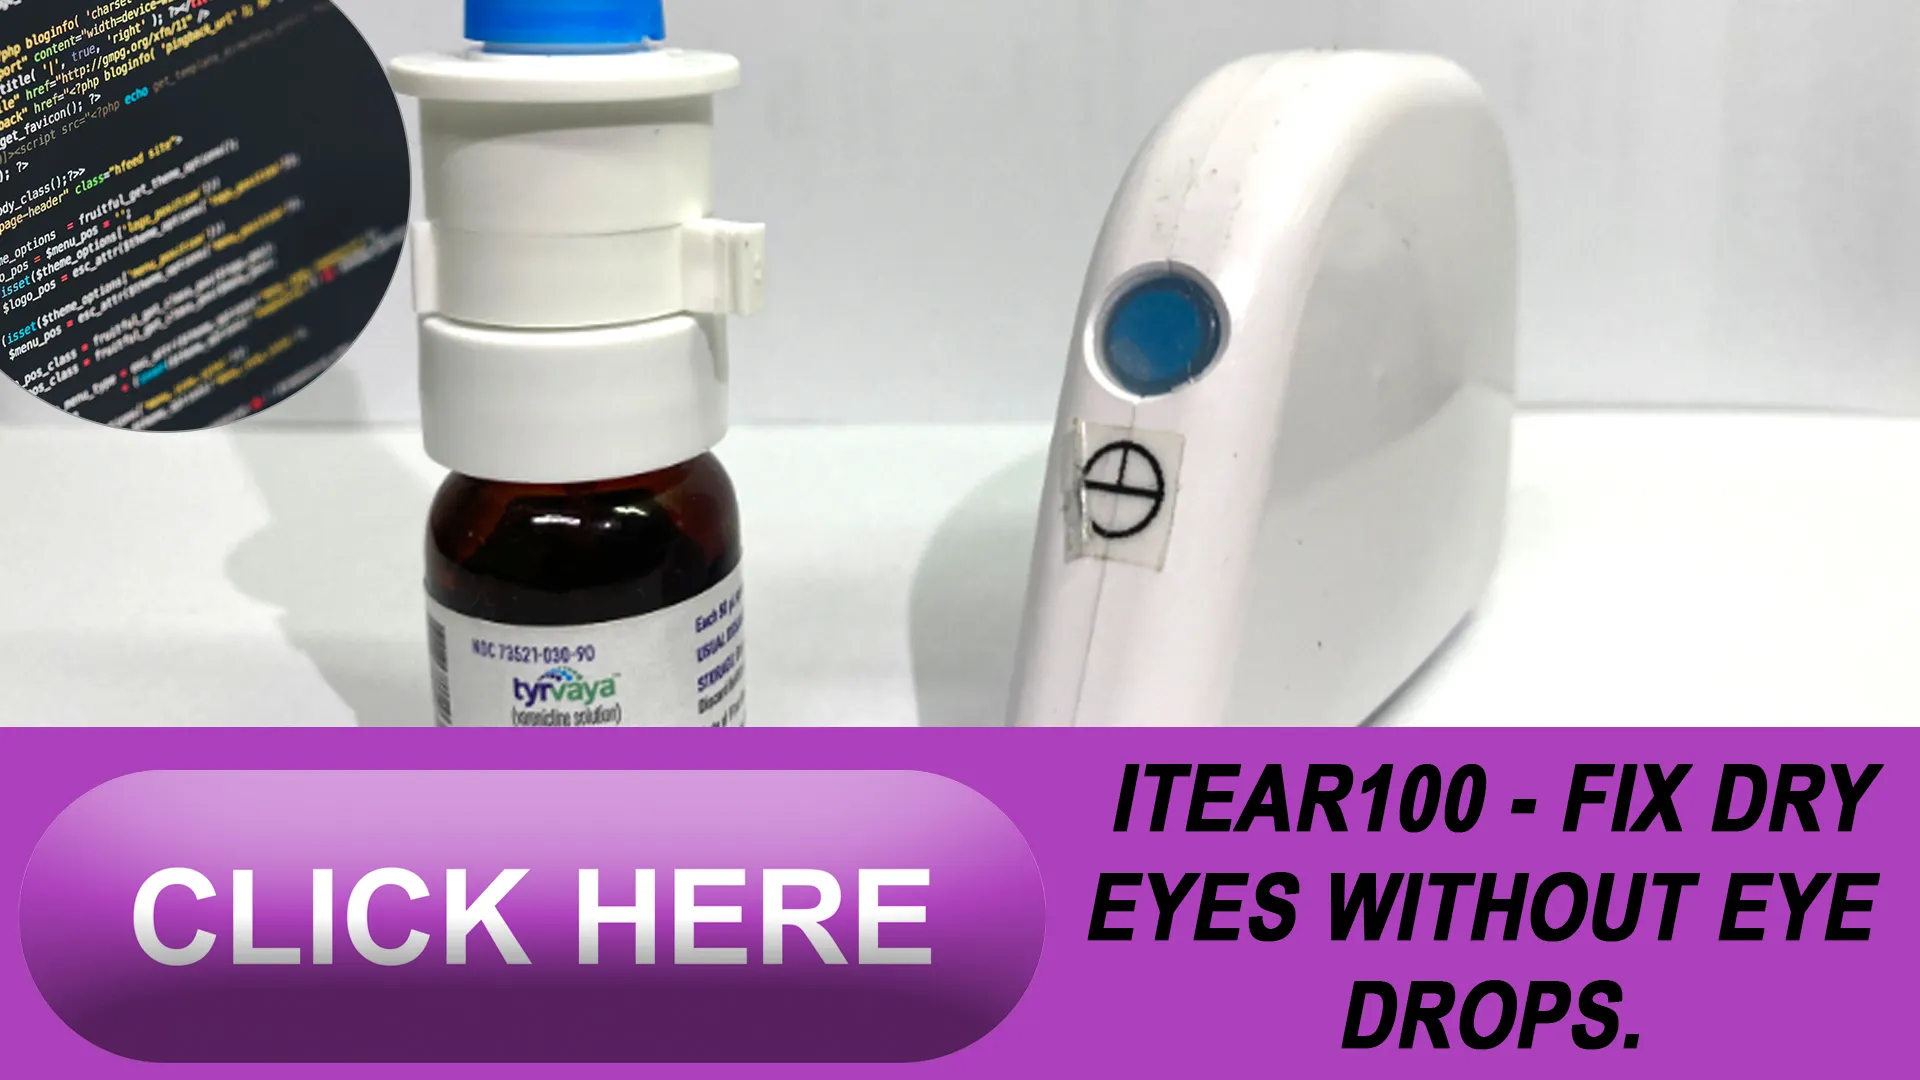 Tackling Dry Eye Disease with iTEAR100: A Drug-Free Approach